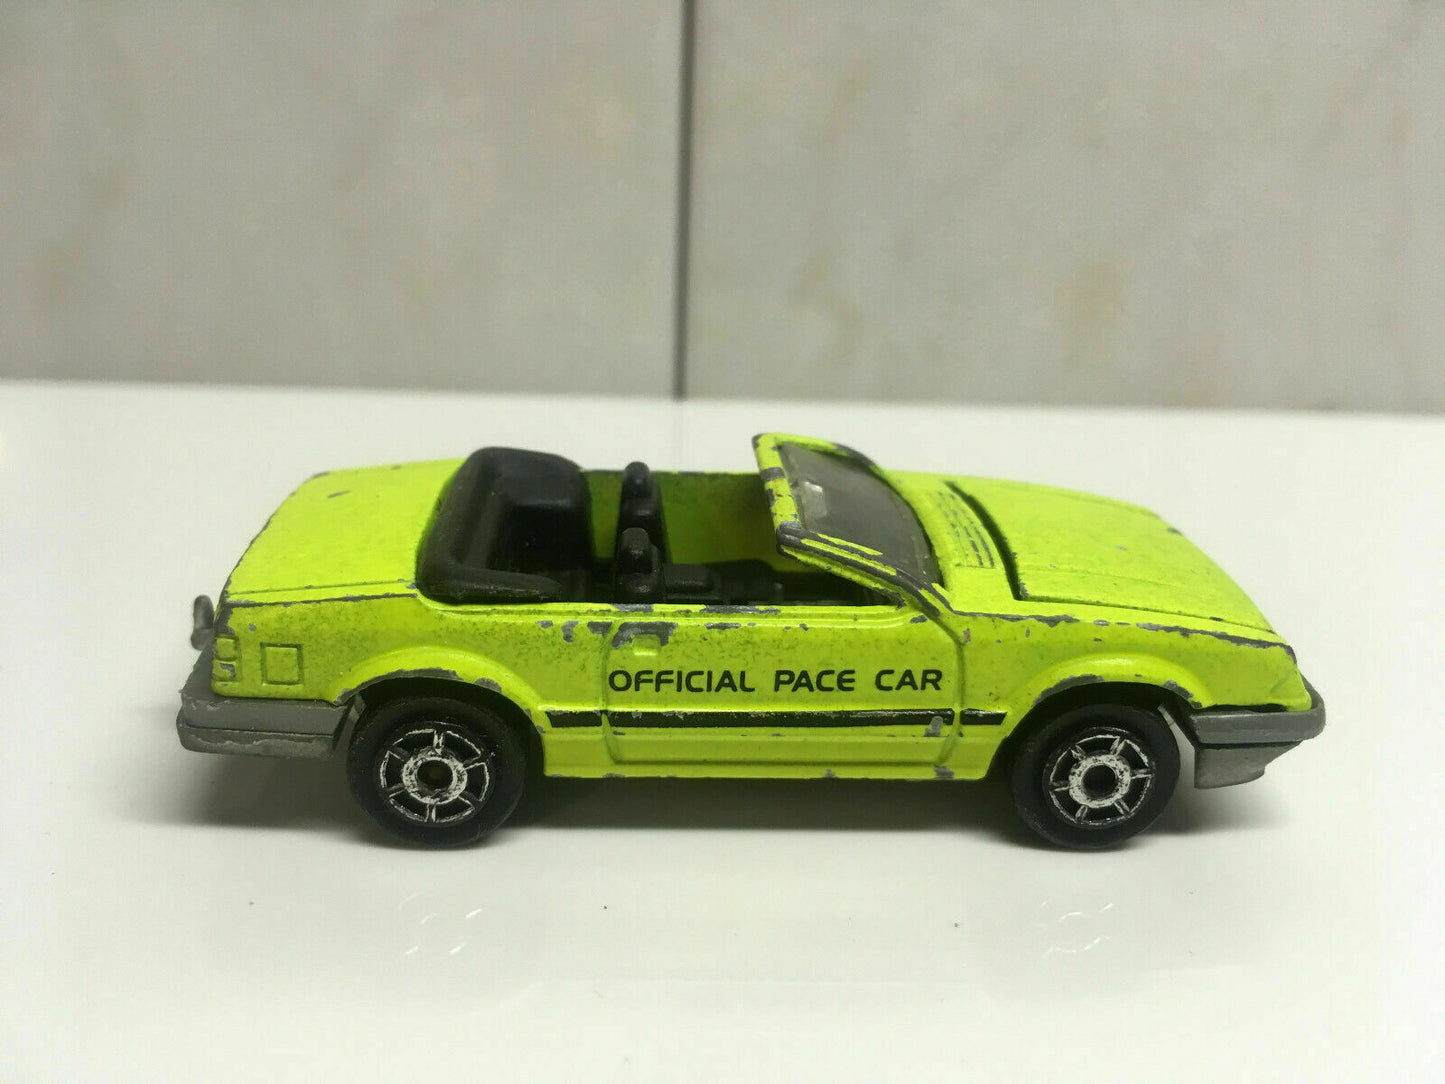 RARE VINTAGE Majorette #227 Yellow Mustang Convertible Official Pace Car